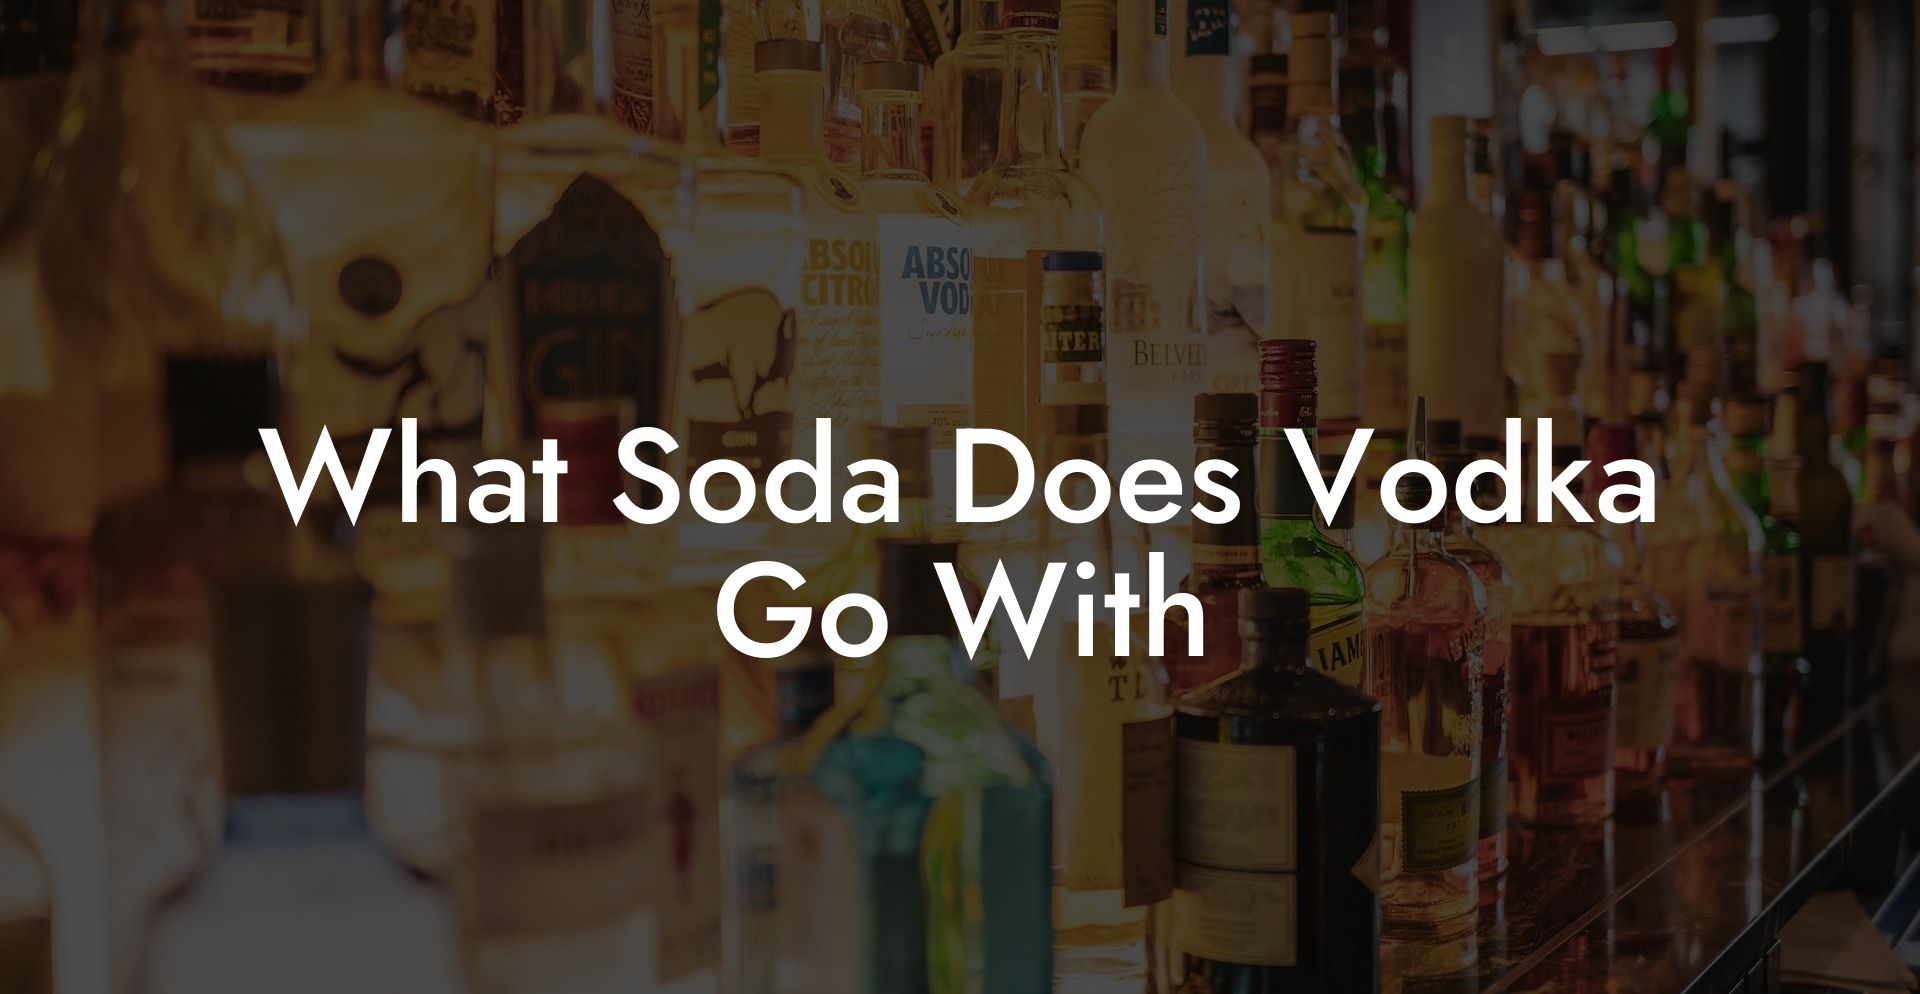 What Soda Does Vodka Go With